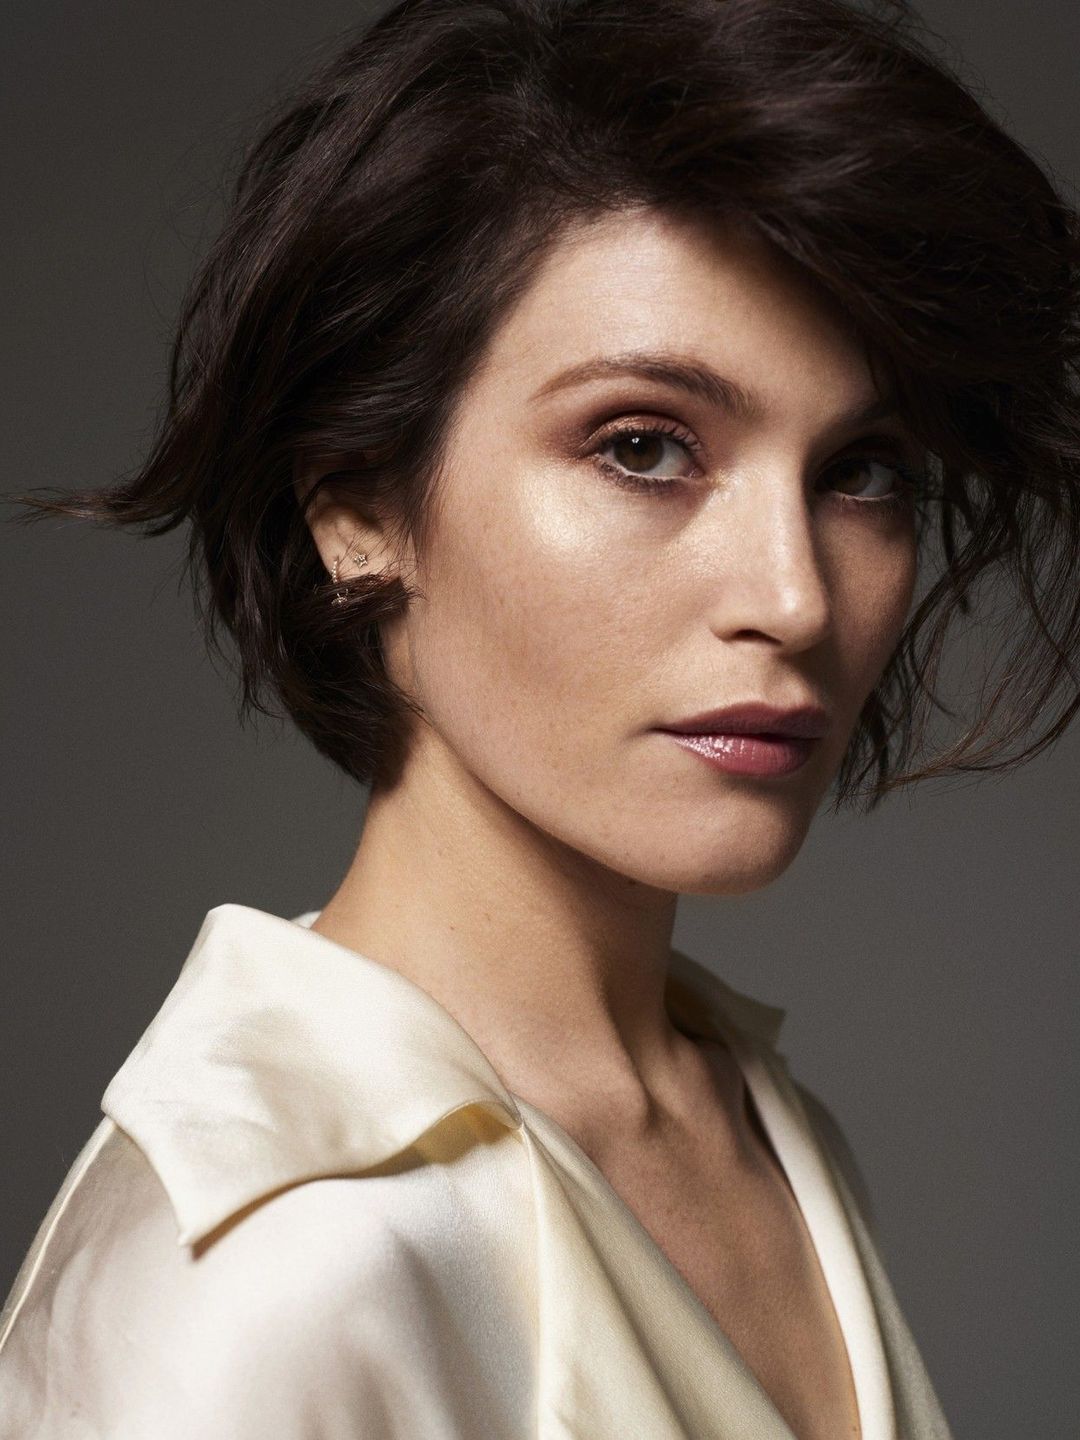 Gemma Arterton who is her father